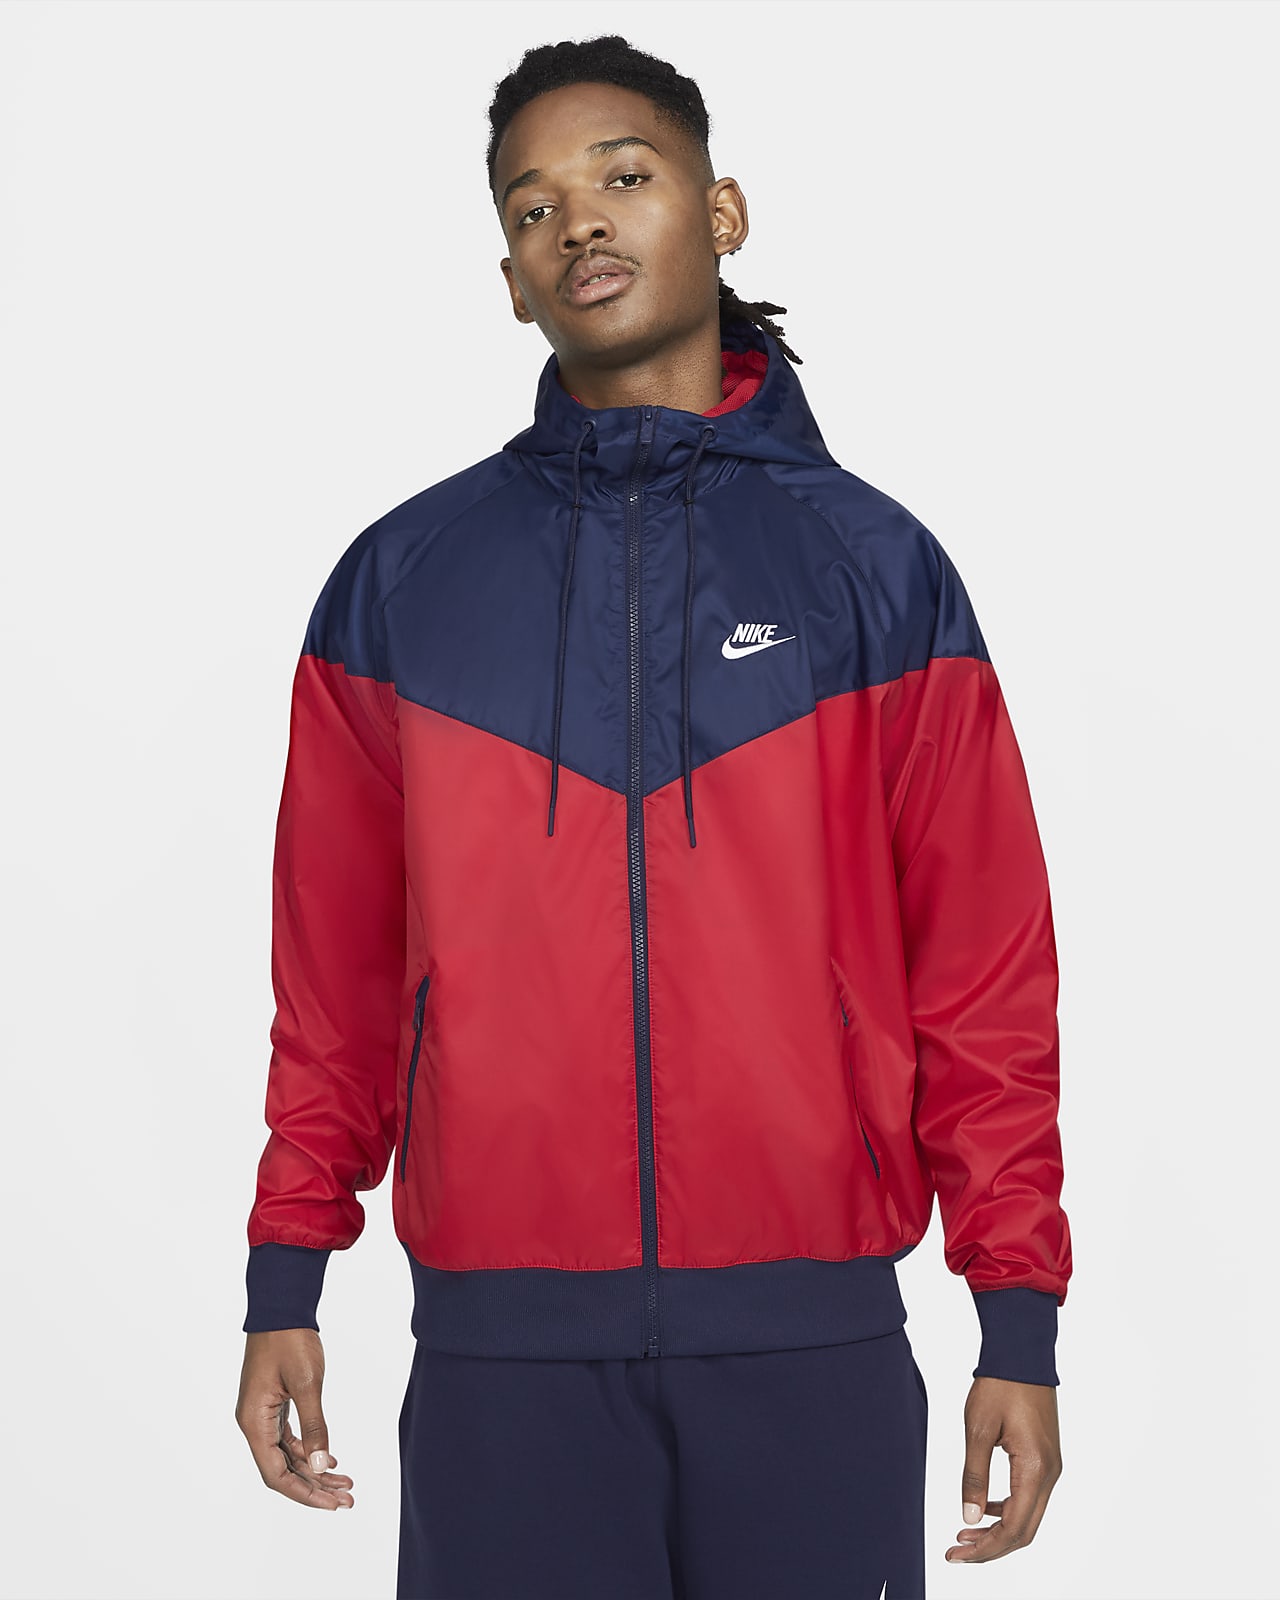 Cyclopen vacht Absurd Nike Sports Wear Windrunner Sale, SAVE 50% - icarus.photos